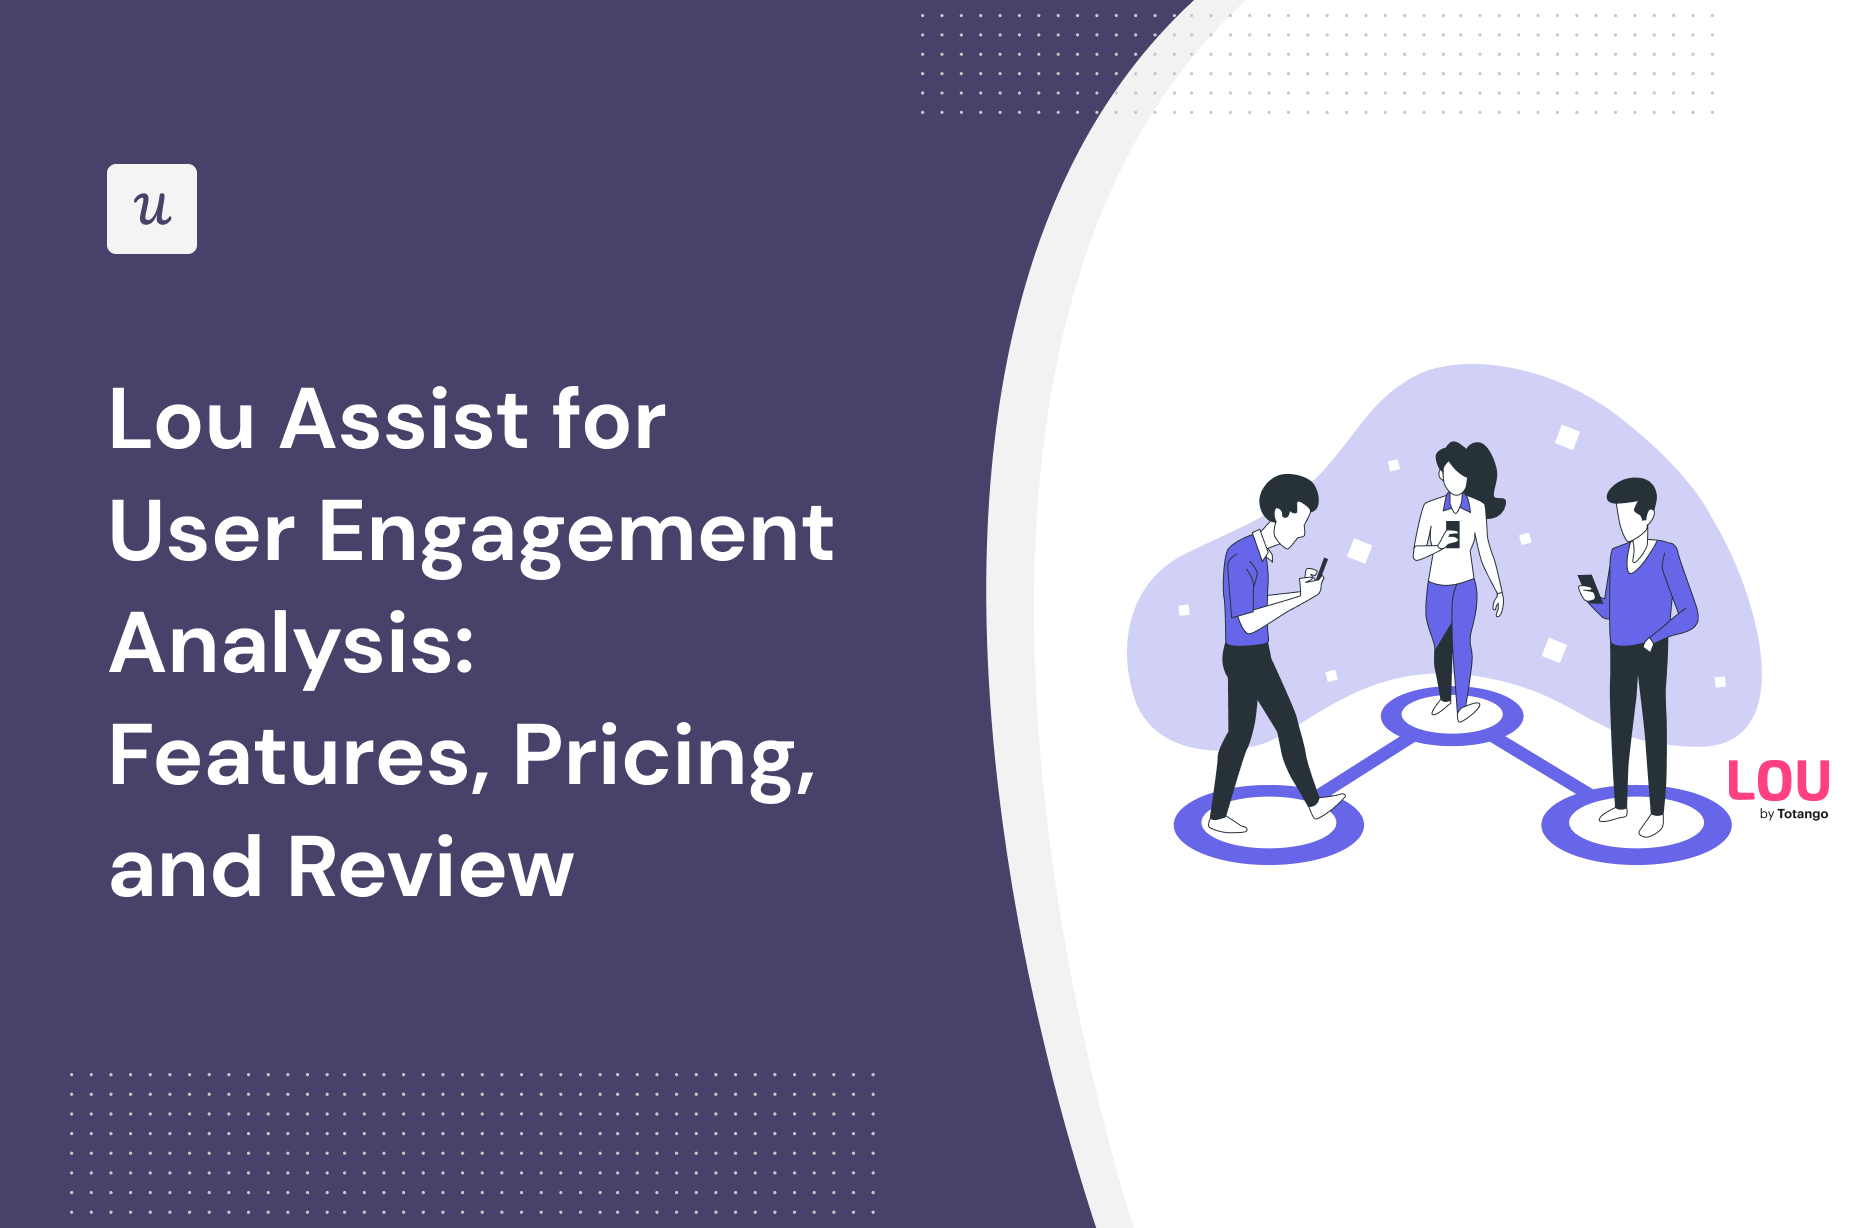 Lou Assist for User Engagement Analysis: Features, Pricing, and Review